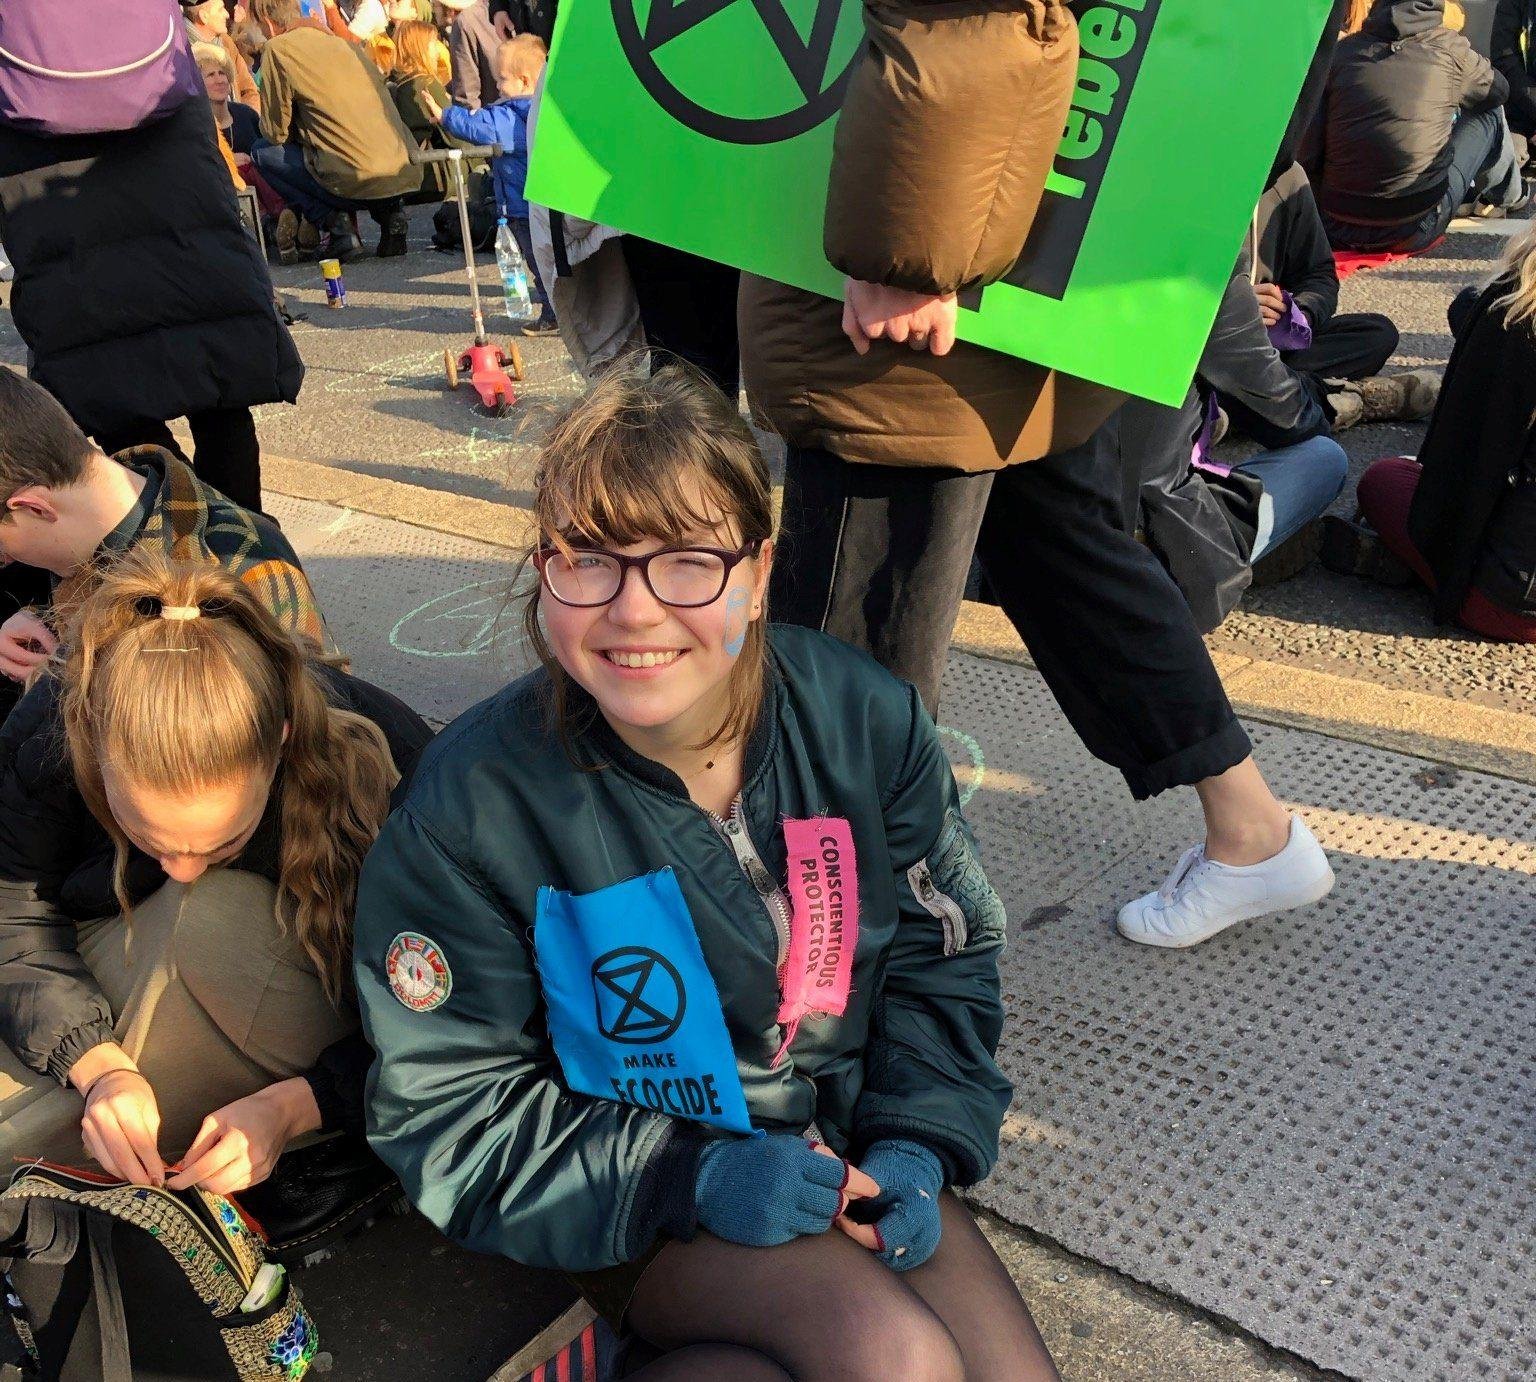 News: In new book, British teen climate activist urges peers to 'Challenge Everything'  GLOBAL HEROES MAGAZINE